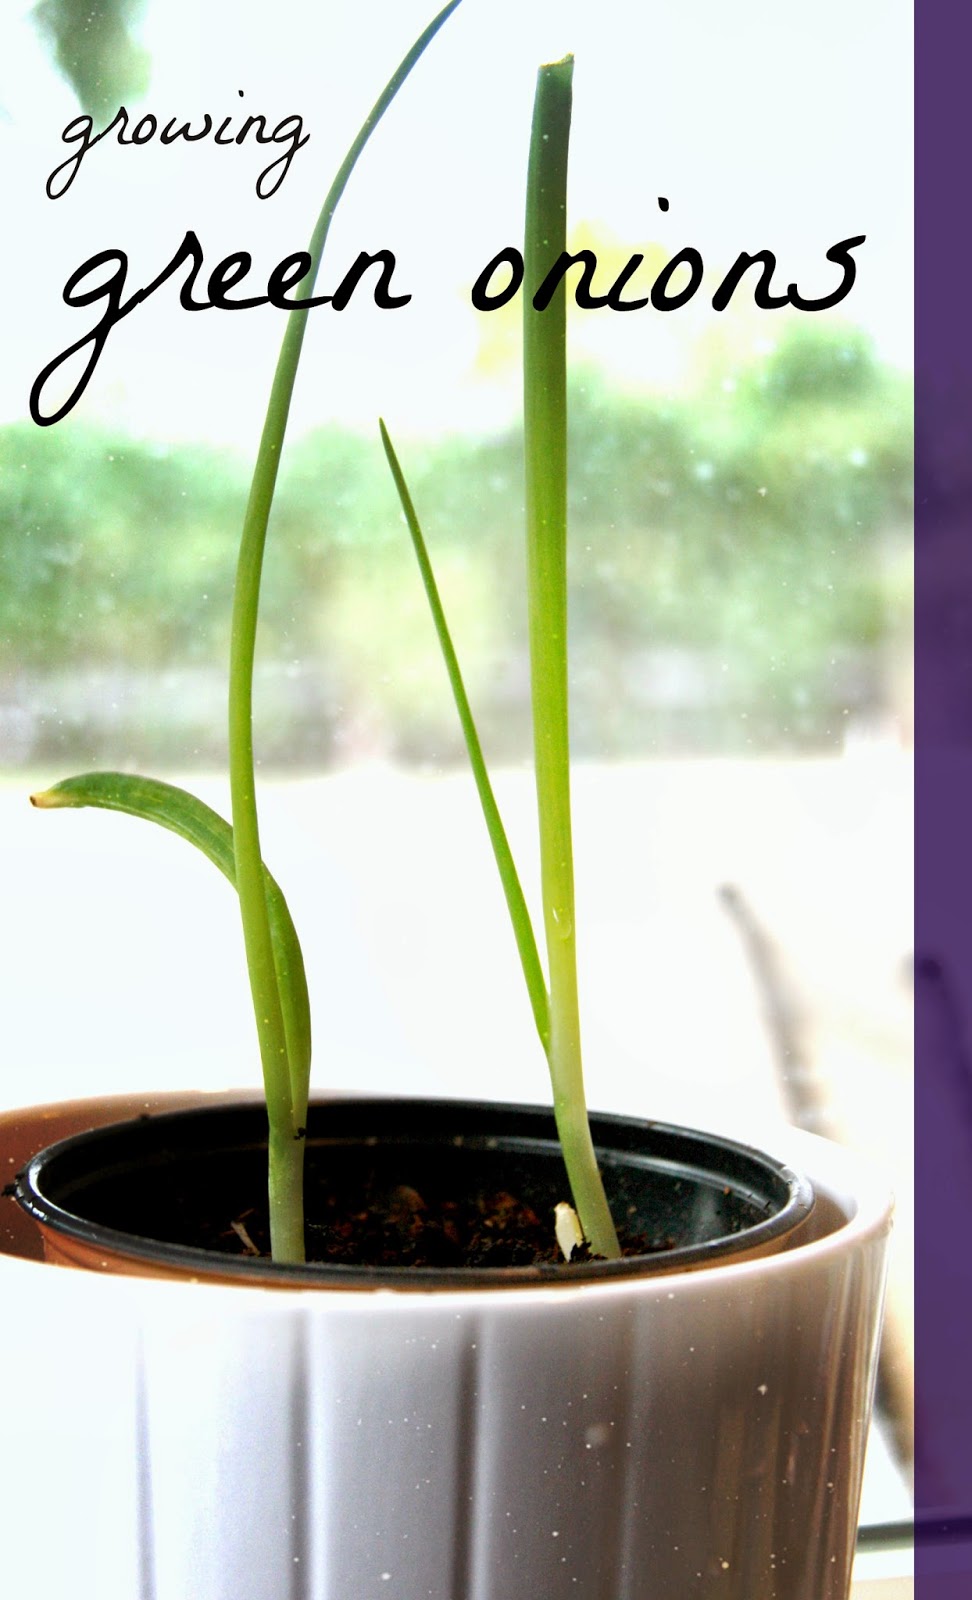 Grow fresh green onions in the kitchen